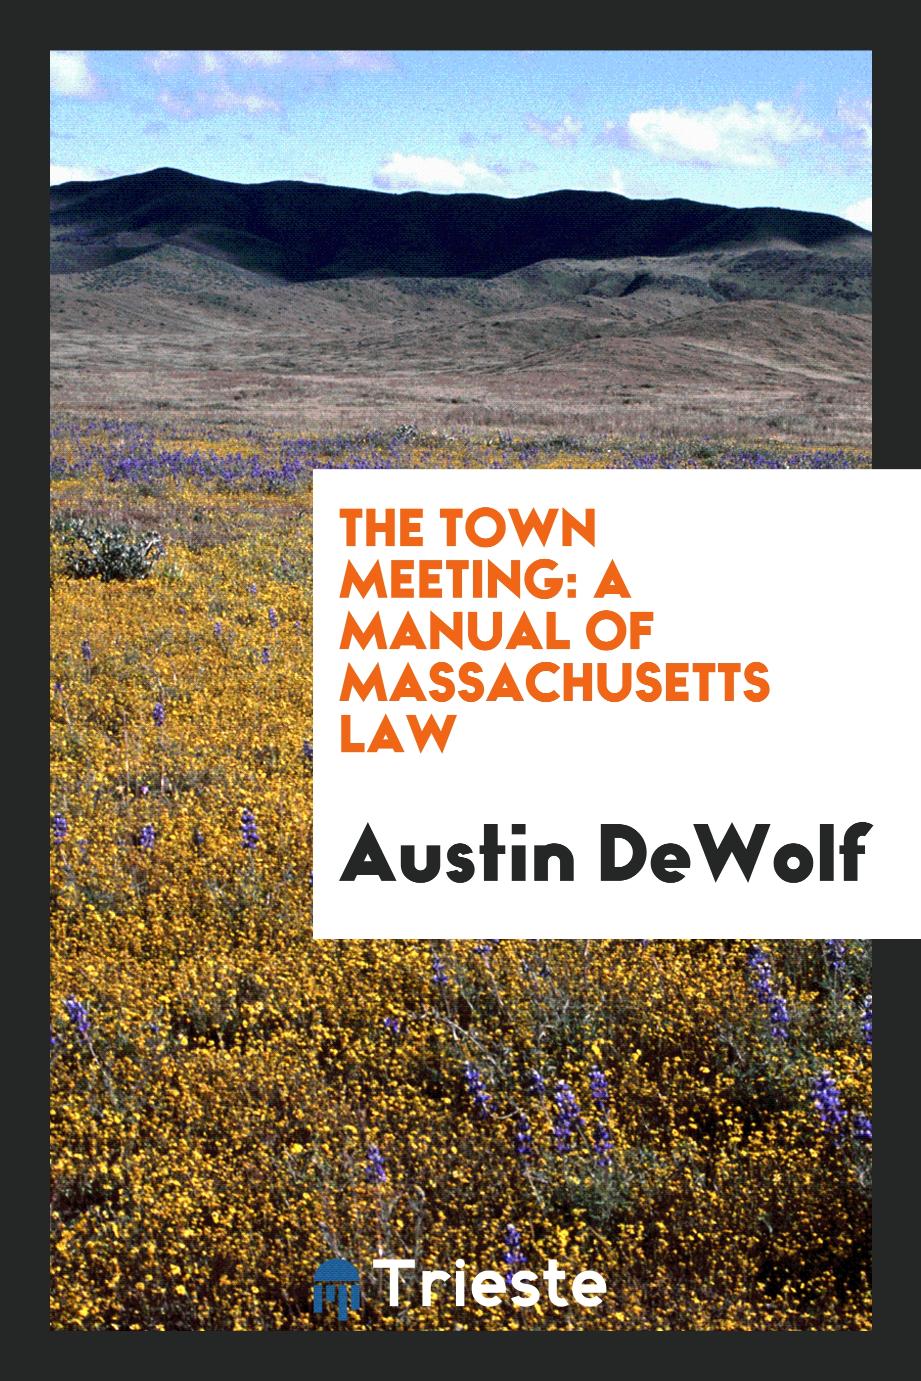 The Town Meeting: A Manual of Massachusetts Law